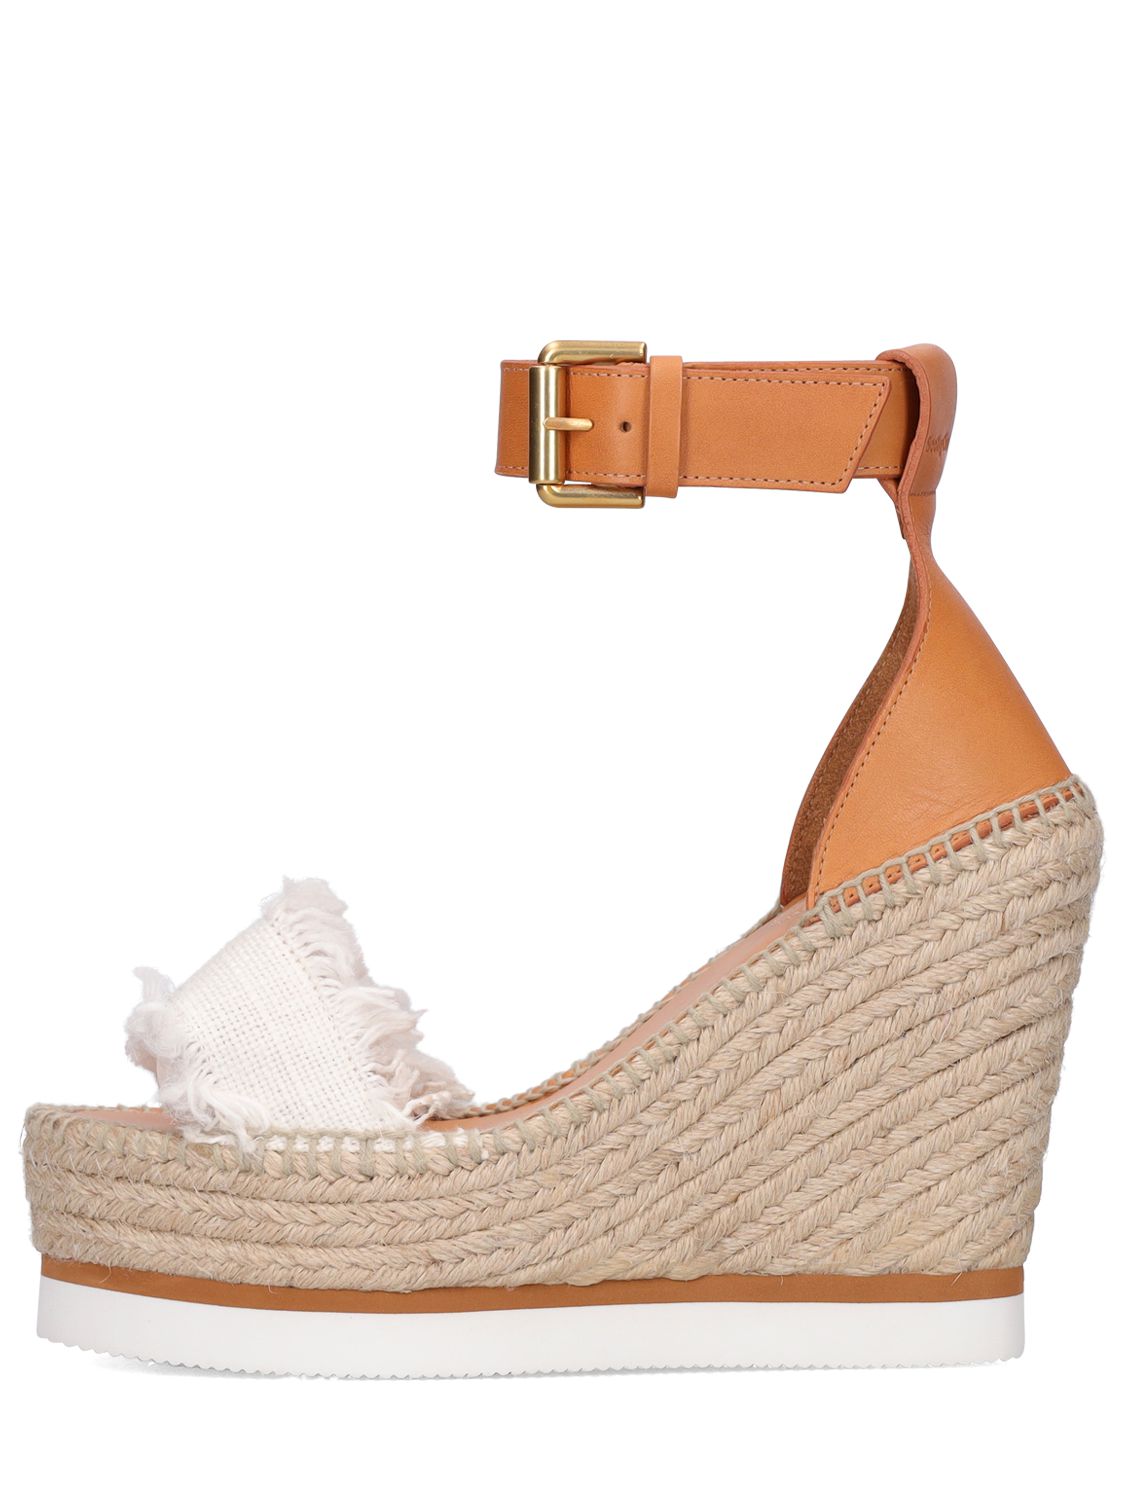 SEE BY CHLOÉ 120mm Glyn Canvas & Leather Wedges